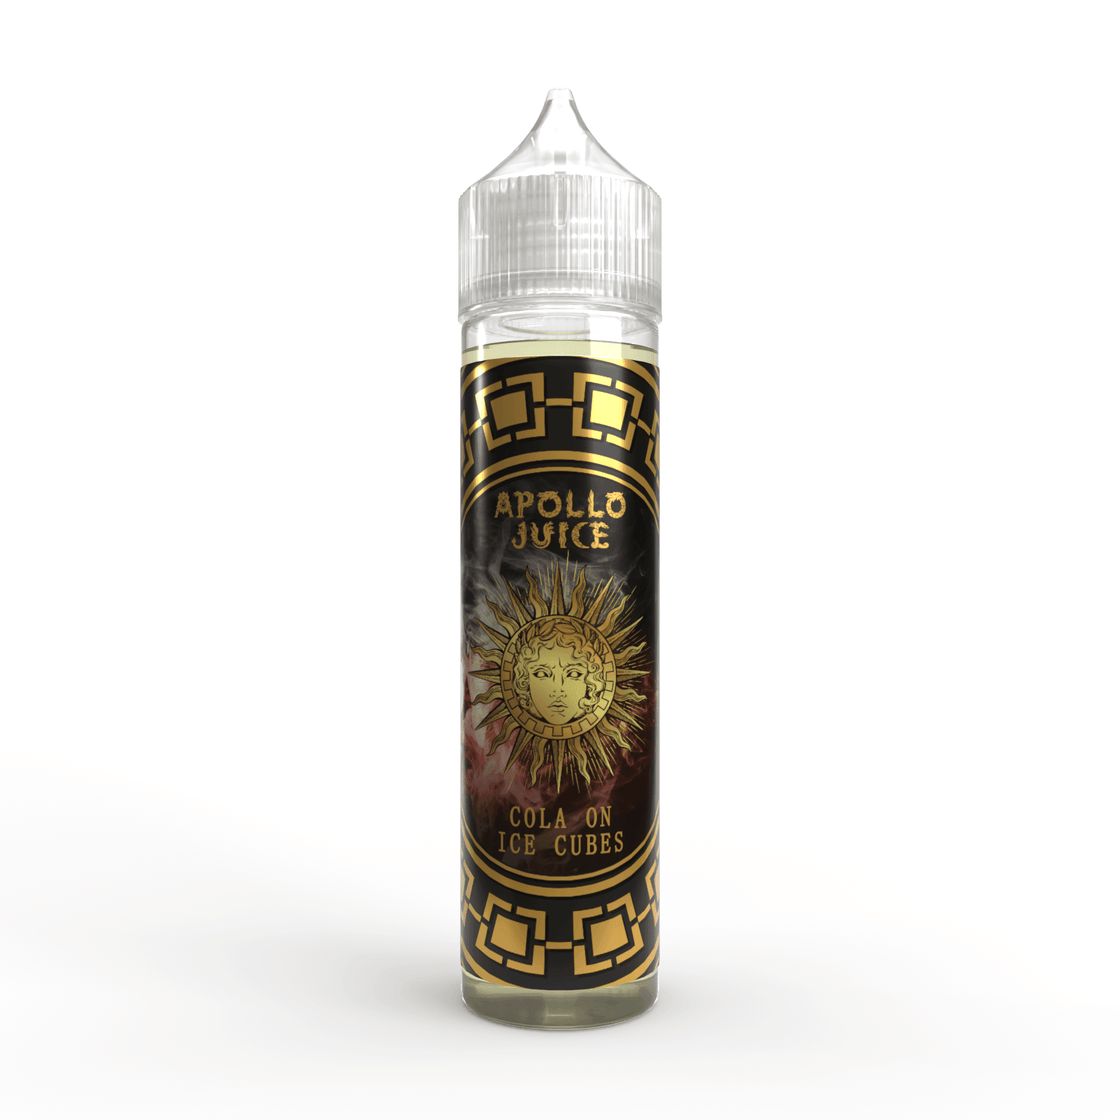 Apollo Juice - Cola On Ice Cubes 70vg 50ml 0mg - Vapeslough